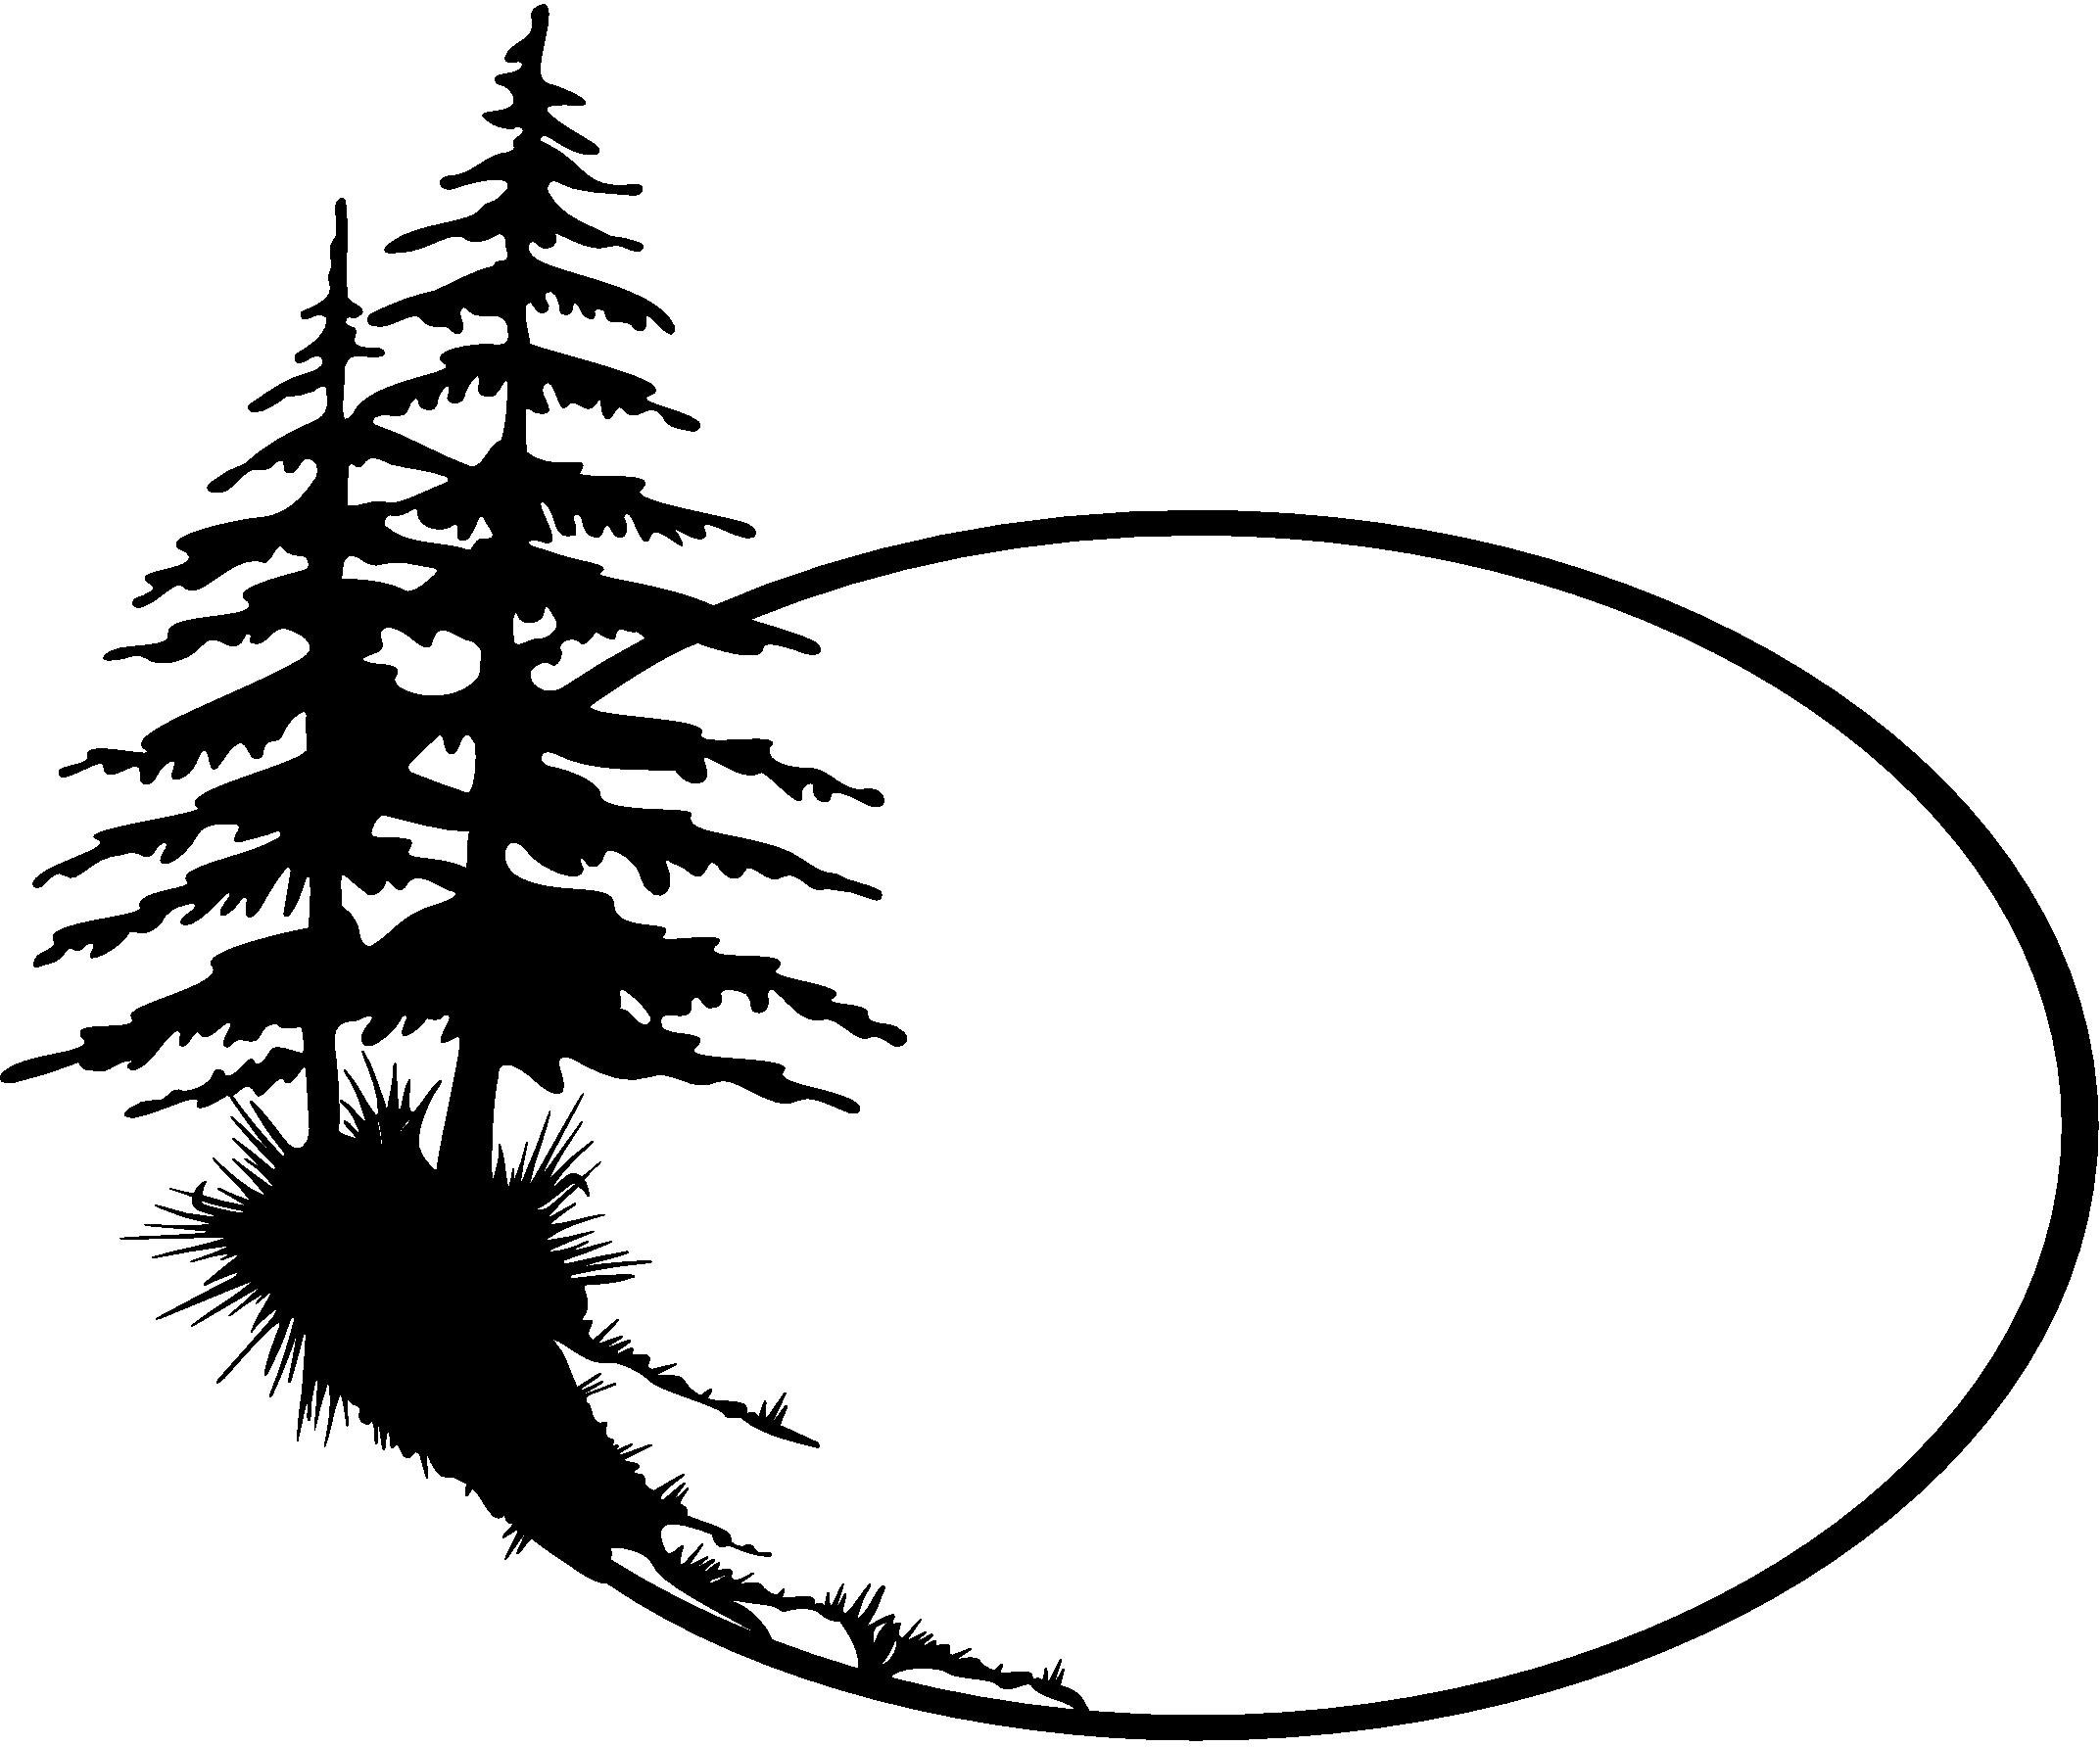 Silhouette of pine trees clipart - ClipartFox